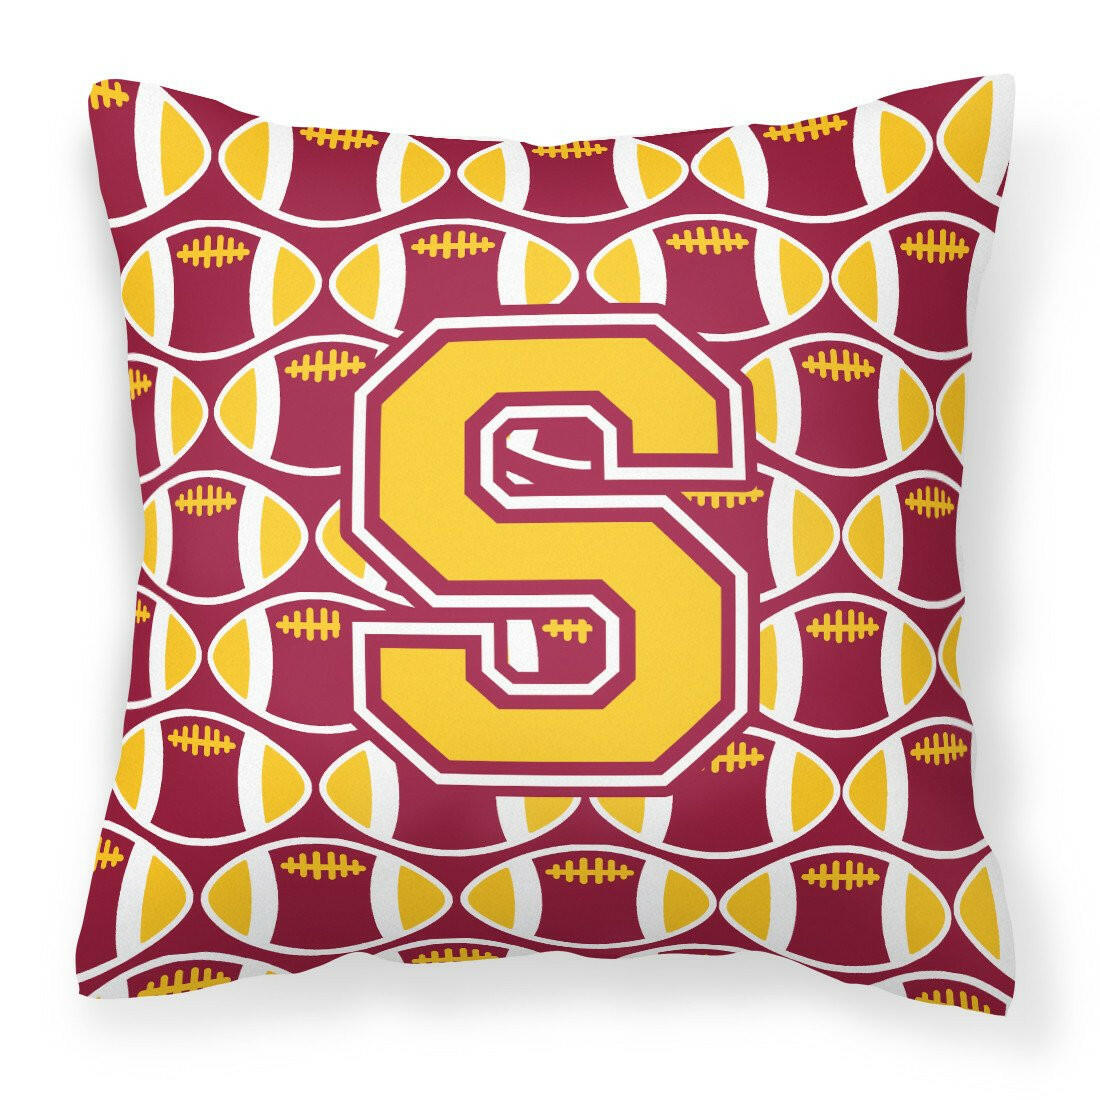 Letter S Football Maroon and Gold Fabric Decorative Pillow CJ1081-SPW1414 by Caroline's Treasures